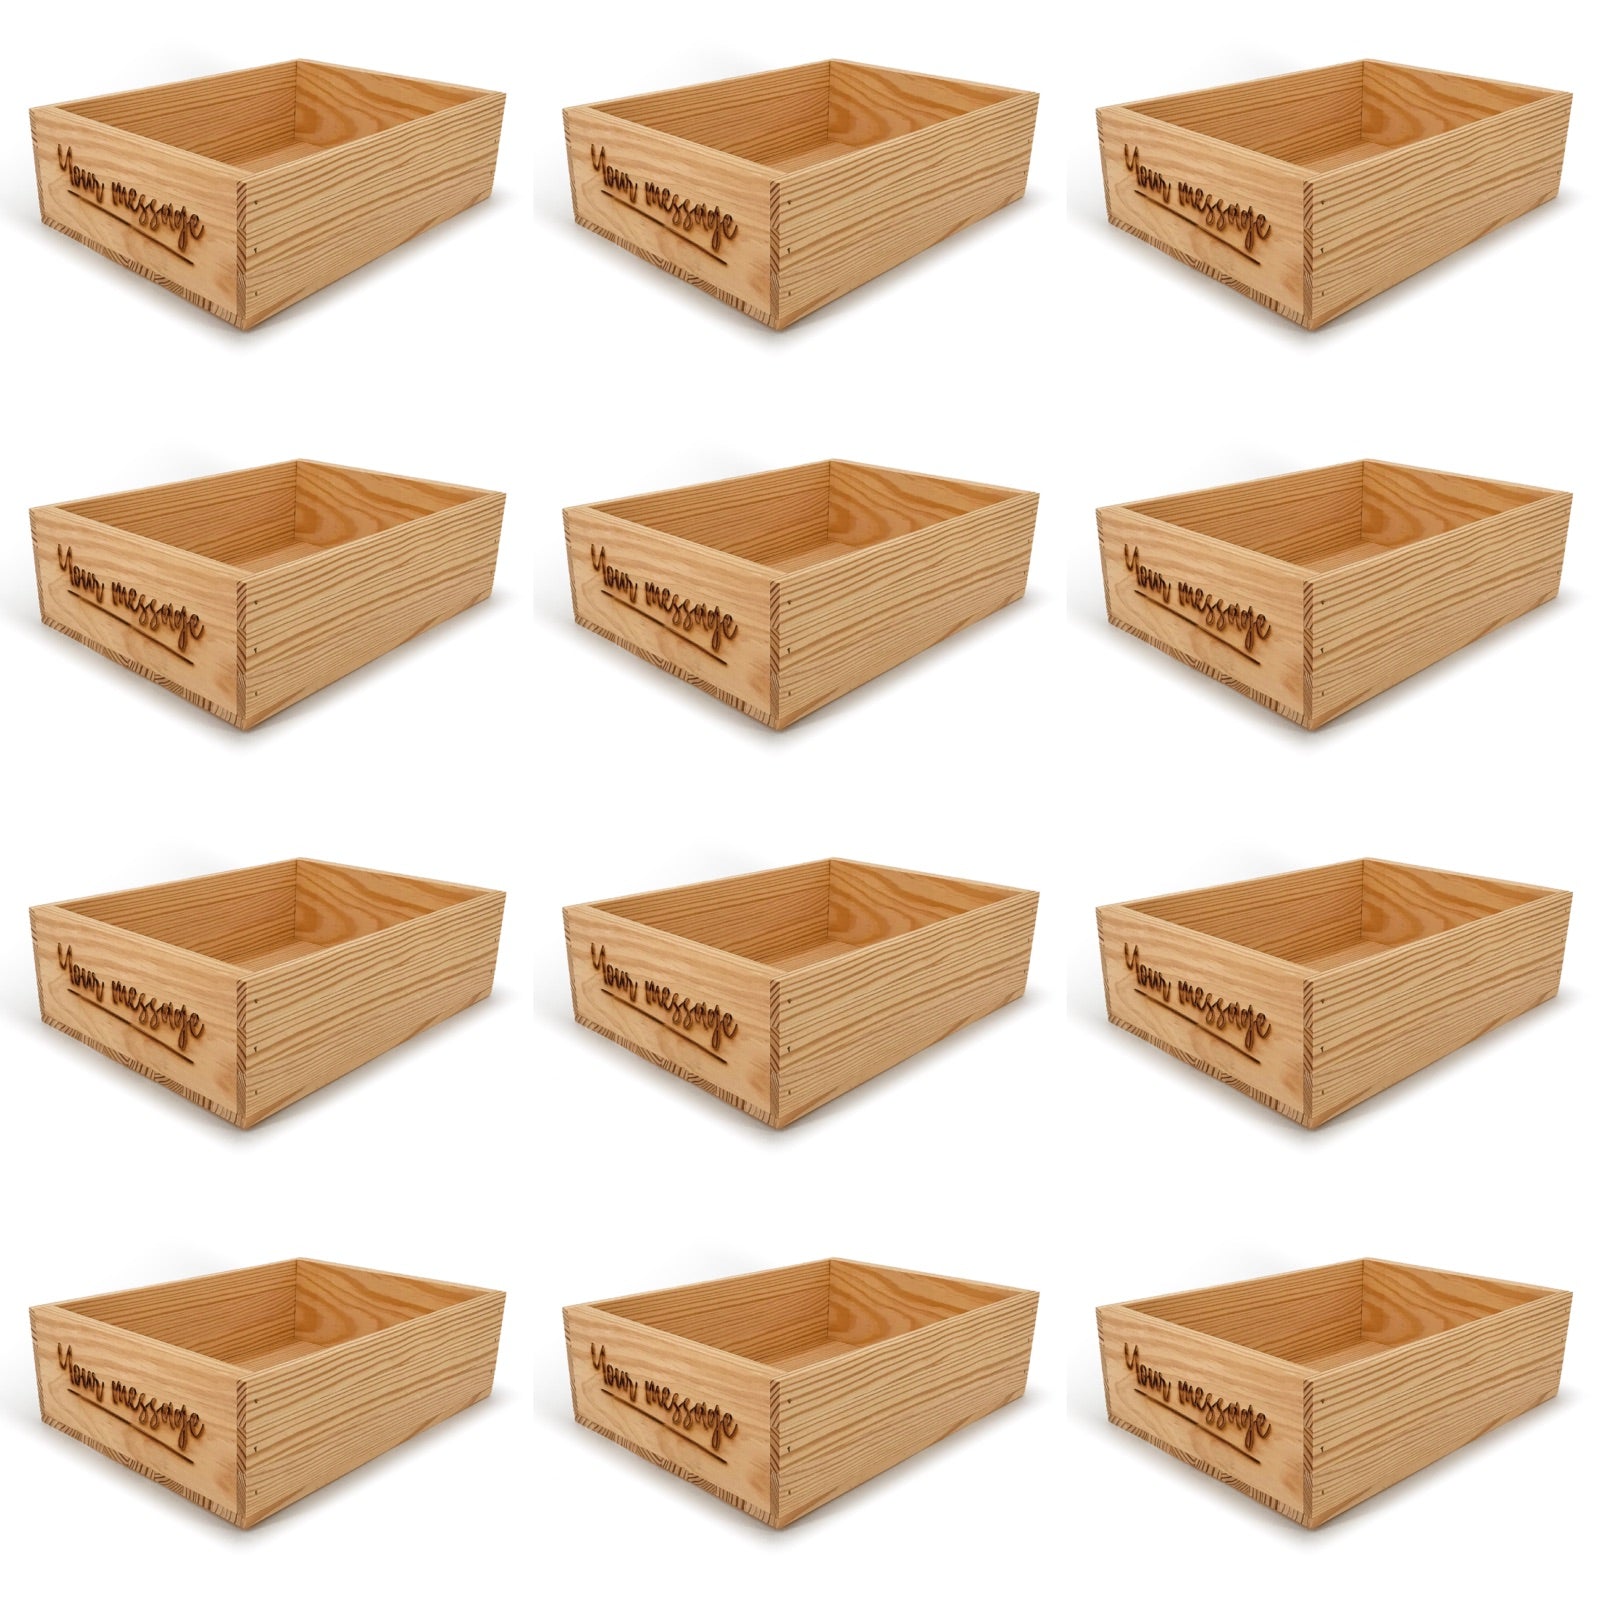 12 Small wooden crates with custom message 14x10x4.25